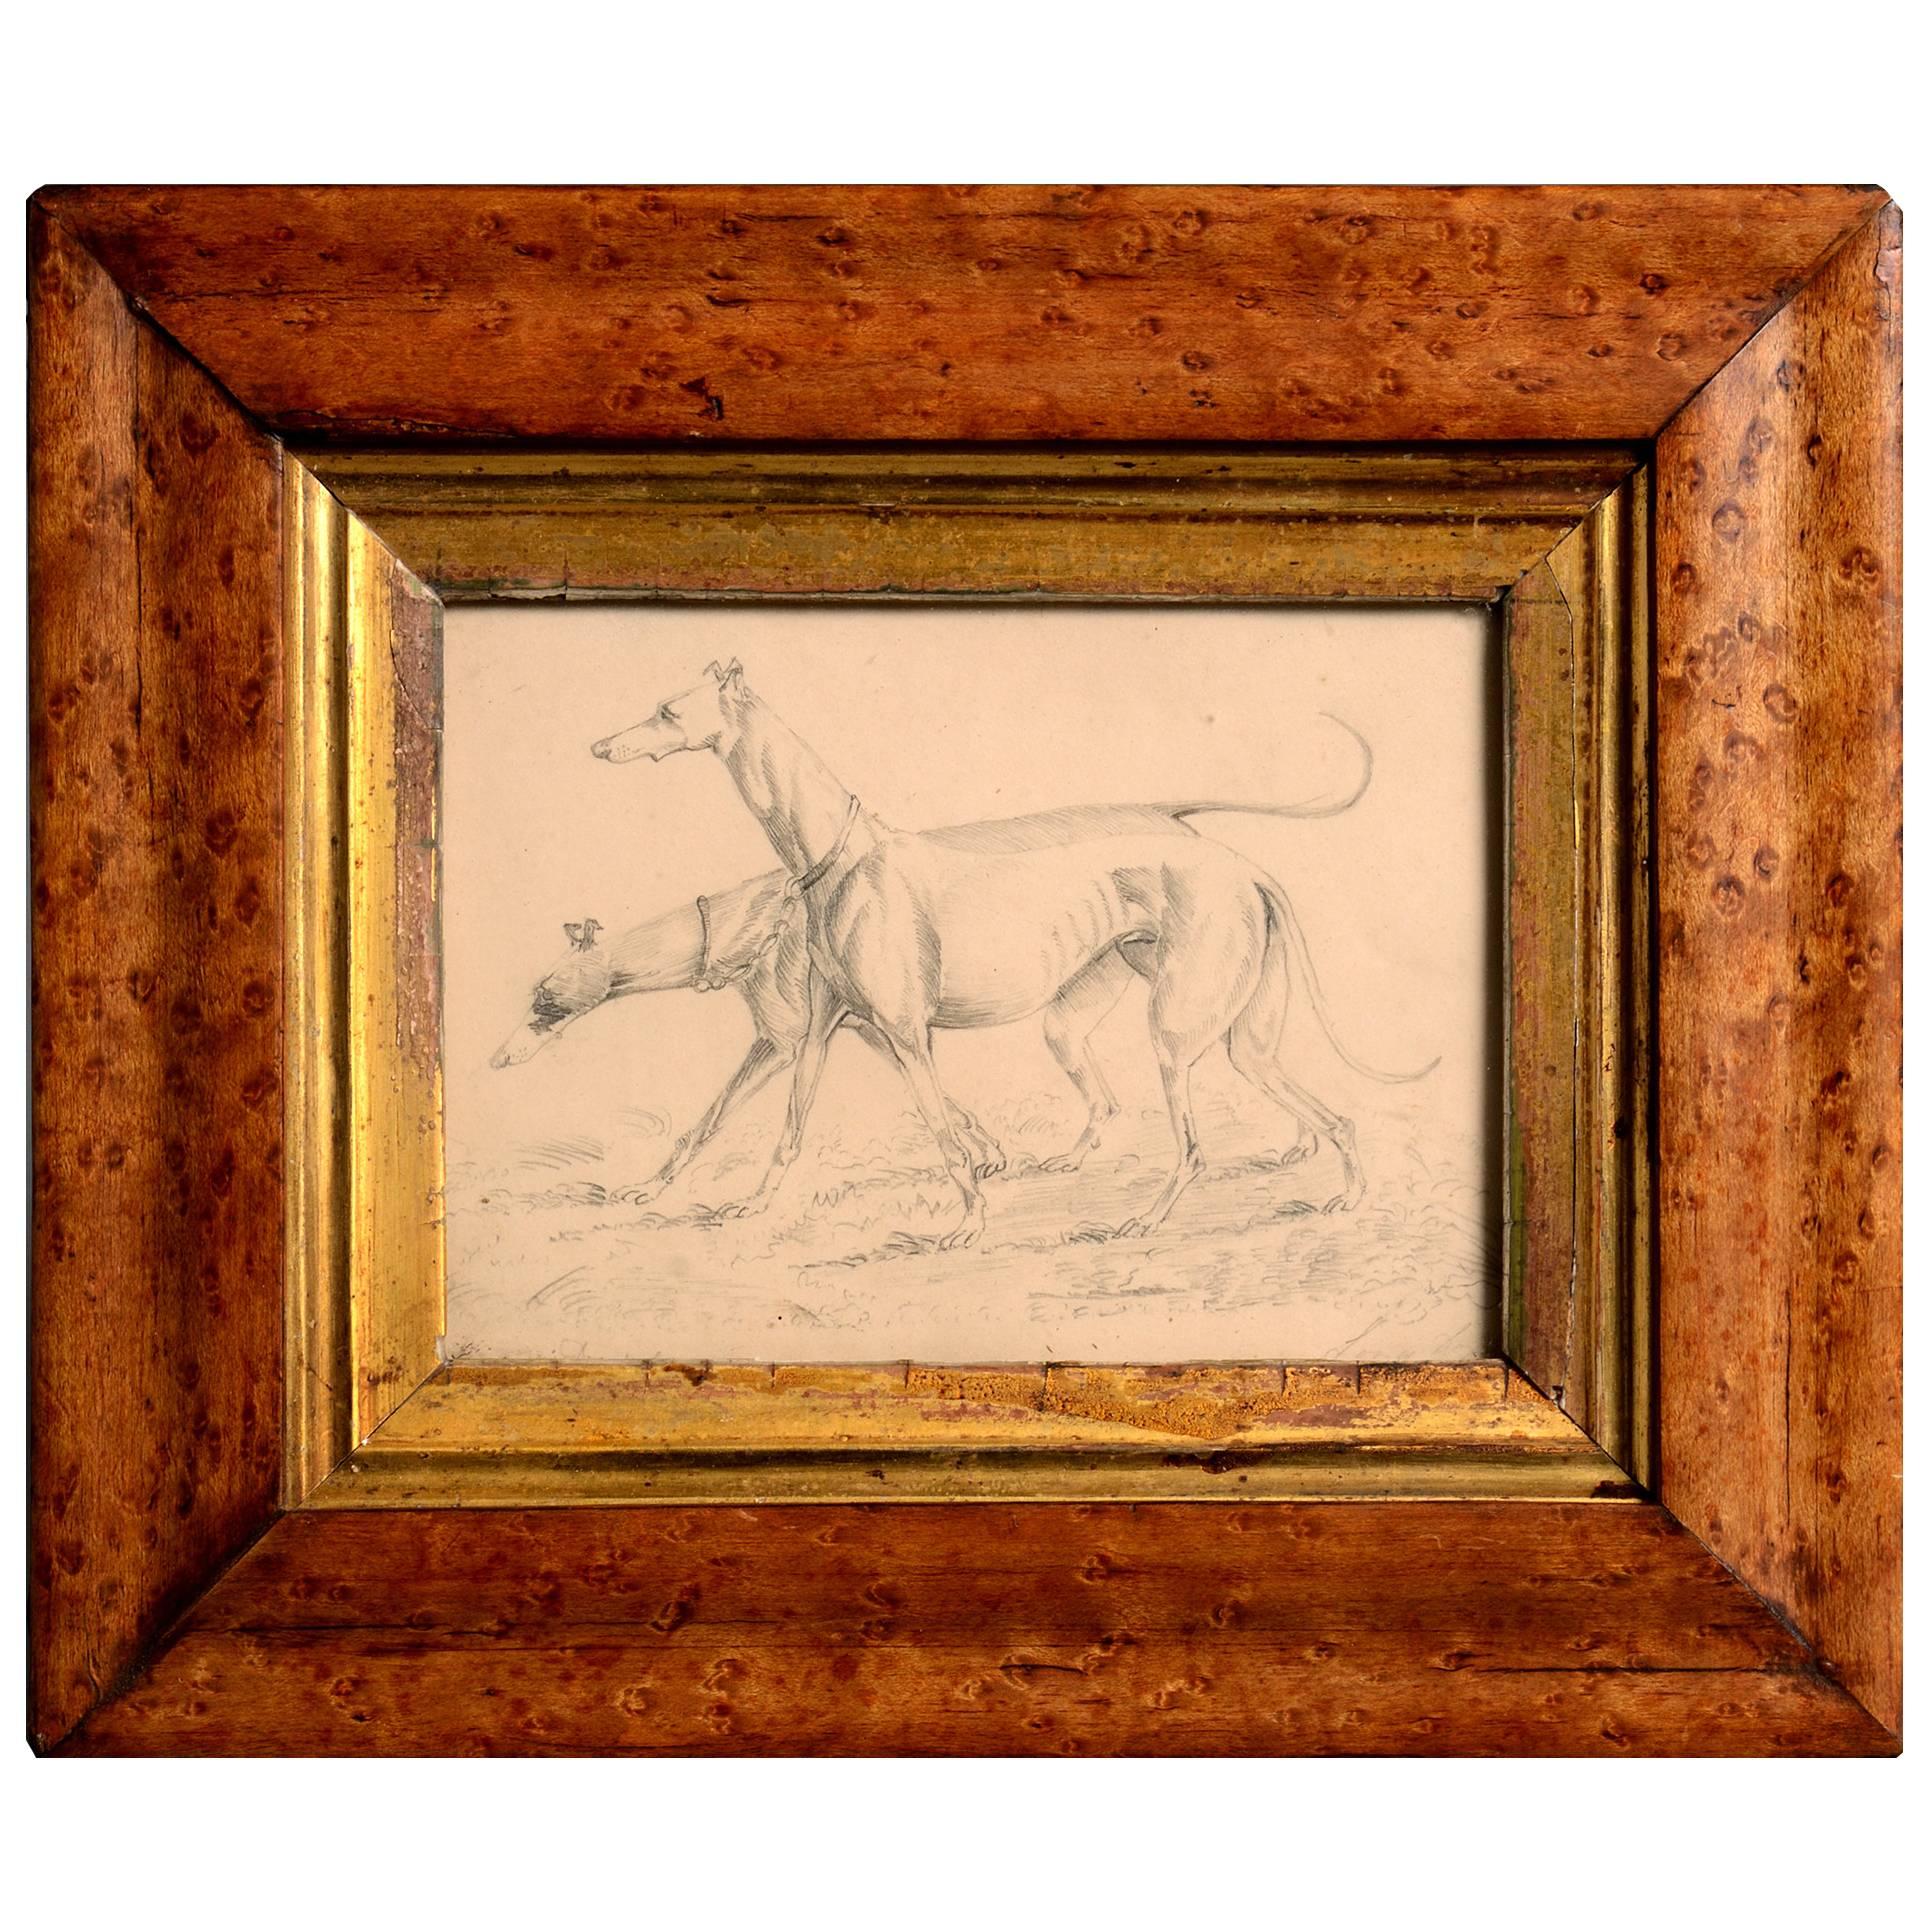 19th Century Pencil Sketch of Two Greyhounds